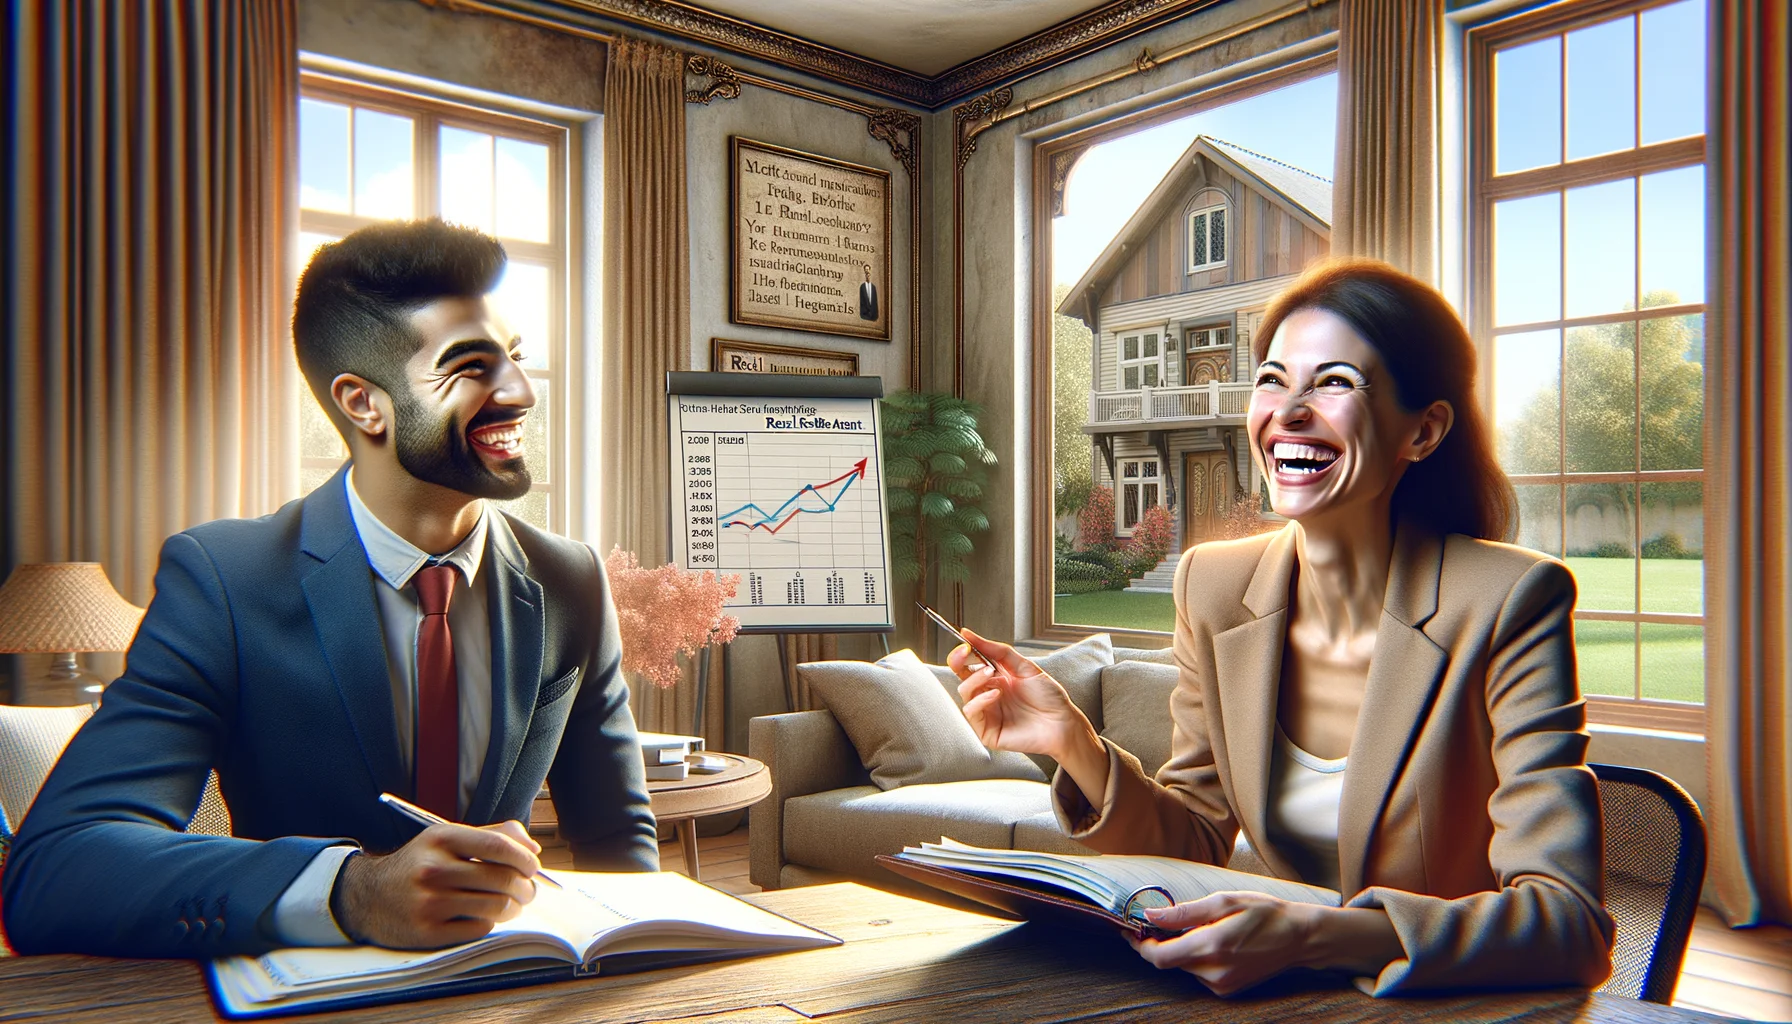 Imagine this: a jubilant, whimsical and insightful scene representing the perfect scenario for selecting a real estate agent. The setting is an elegant, spacious office, filled with natural light coming through large windows. On one side, a female, Hispanic real estate agent with a vibrant smile and an air of professionalism discloses her knowledge about some hypothetical property. She has a planner in her hand showing her organized schedule and success stories. On the other side, a South Asian male client, fascinated by her know-how, is happily taking notes from her. On the wall, there is an analytical chart, depicting the housing market trends. The atmosphere is light-hearted and filled with laughter, emphasizing the friendly yet professional bond between the real estate agent and the client.